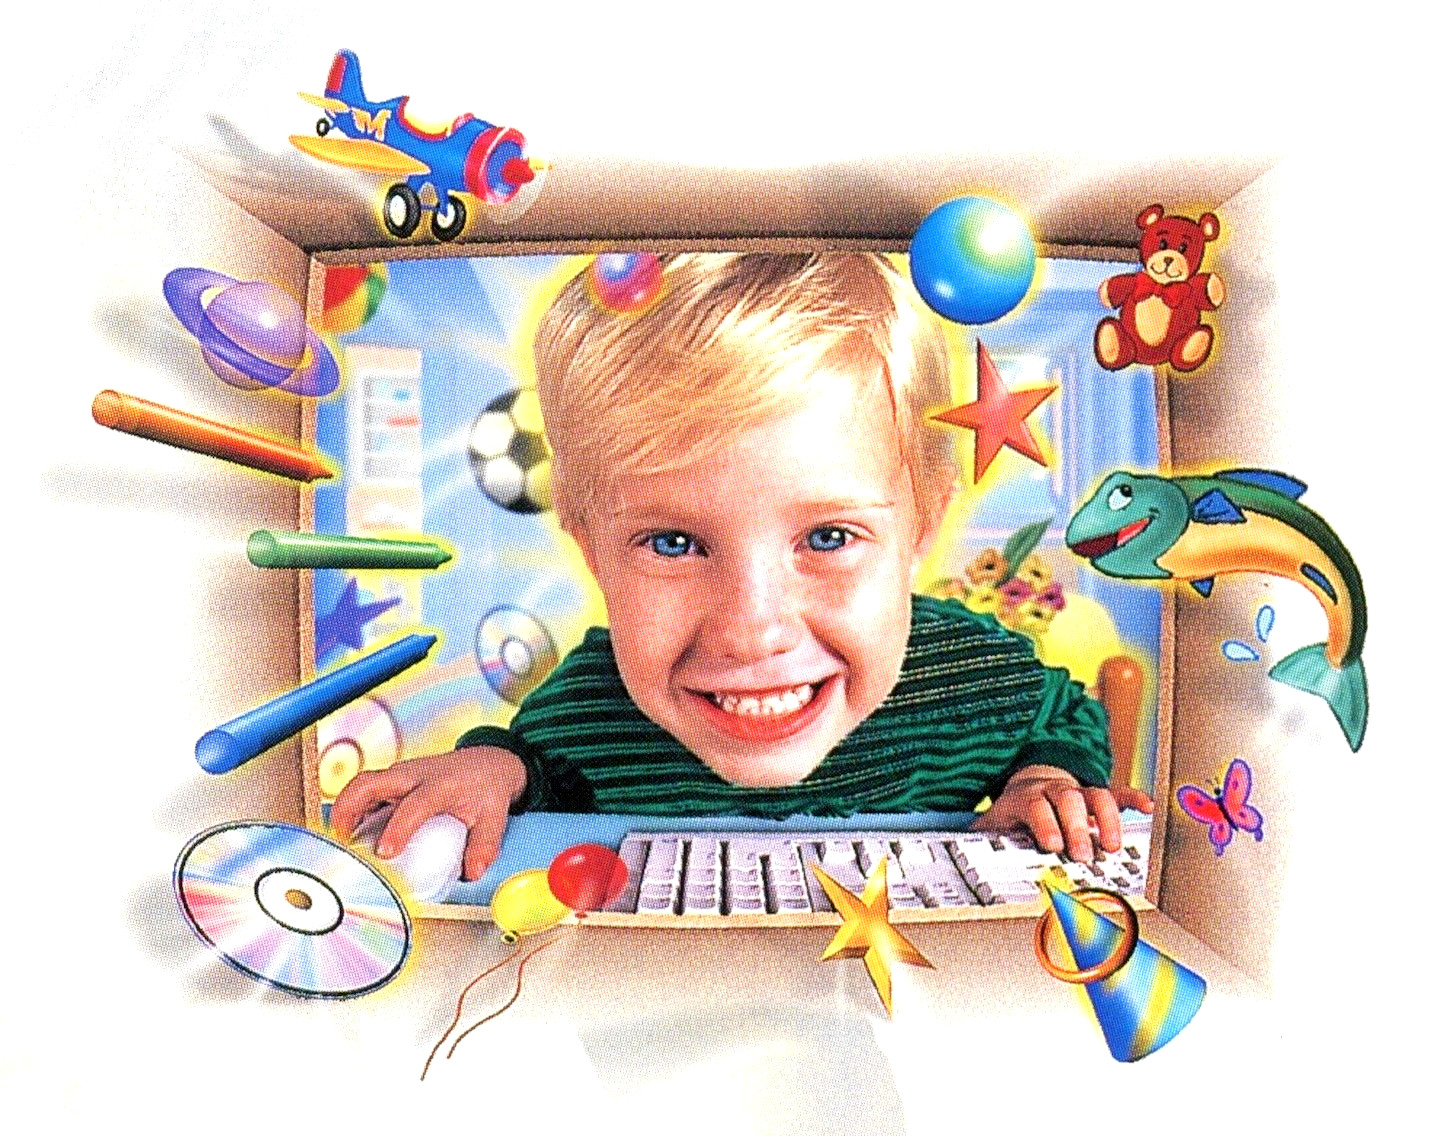 A young child peering in through a computer screen surrounded by various colorful fun objects such as balloons and a CD disc.